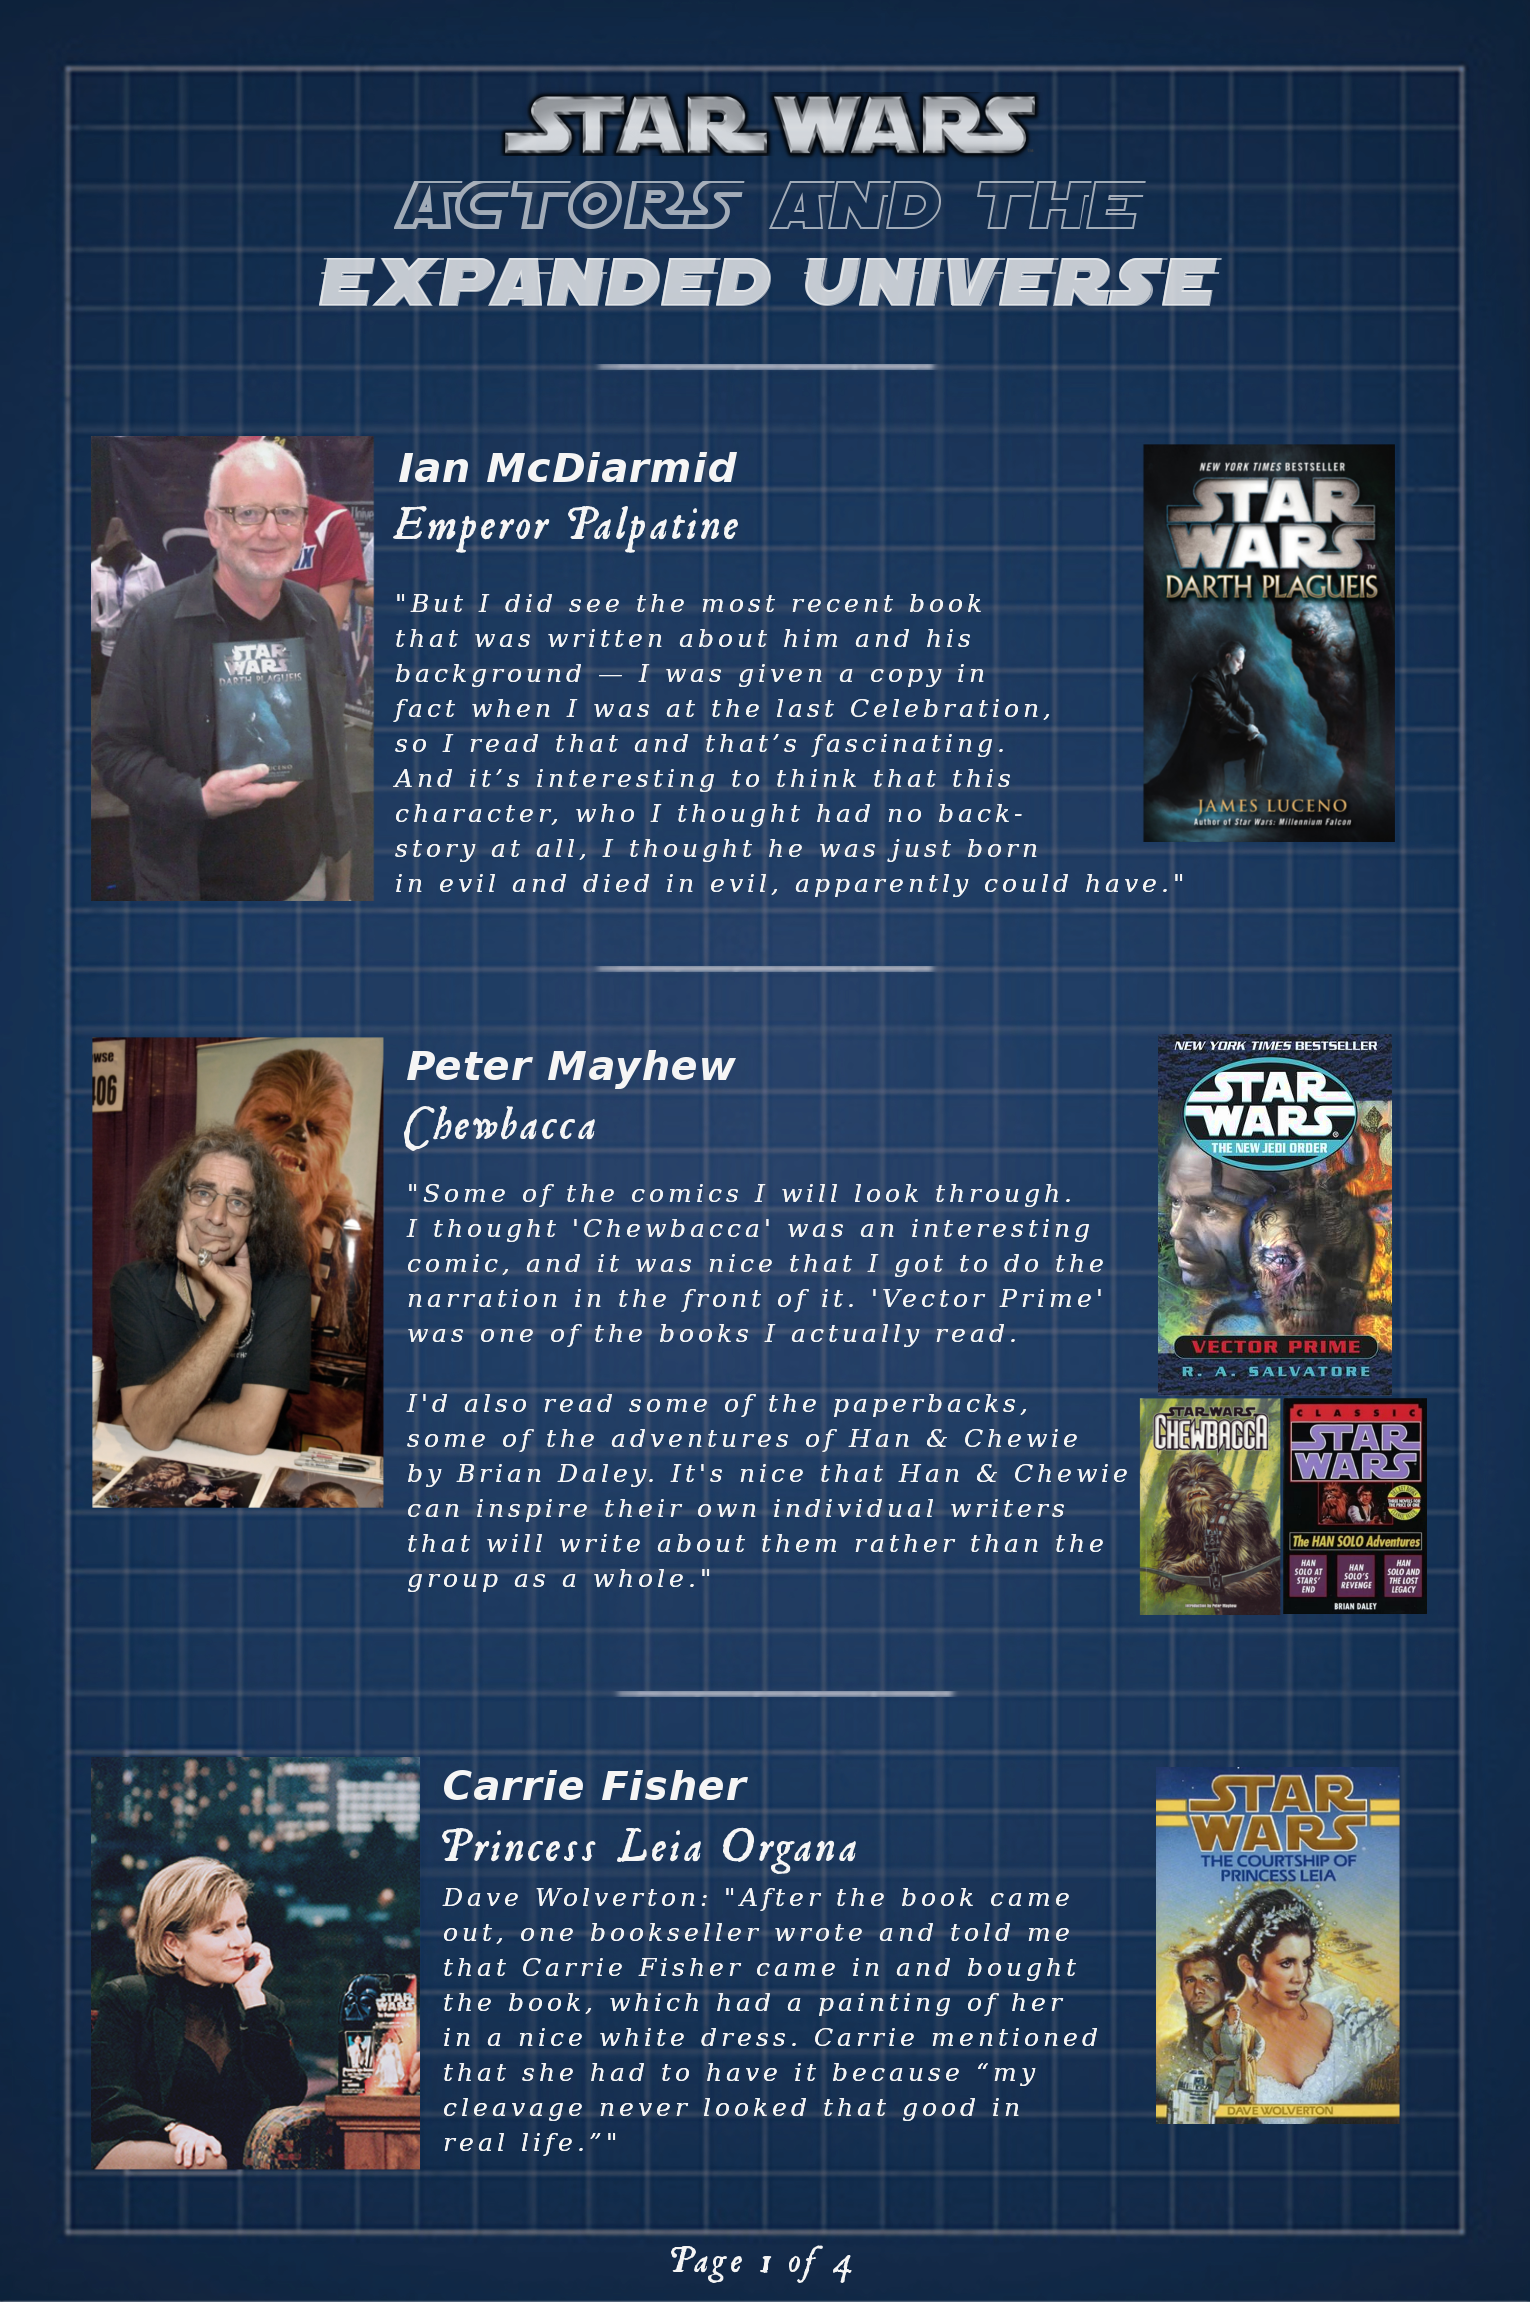 Beyond the Saga: Star Wars Actors' Involvement in Spin-Offs and Expanded Universe